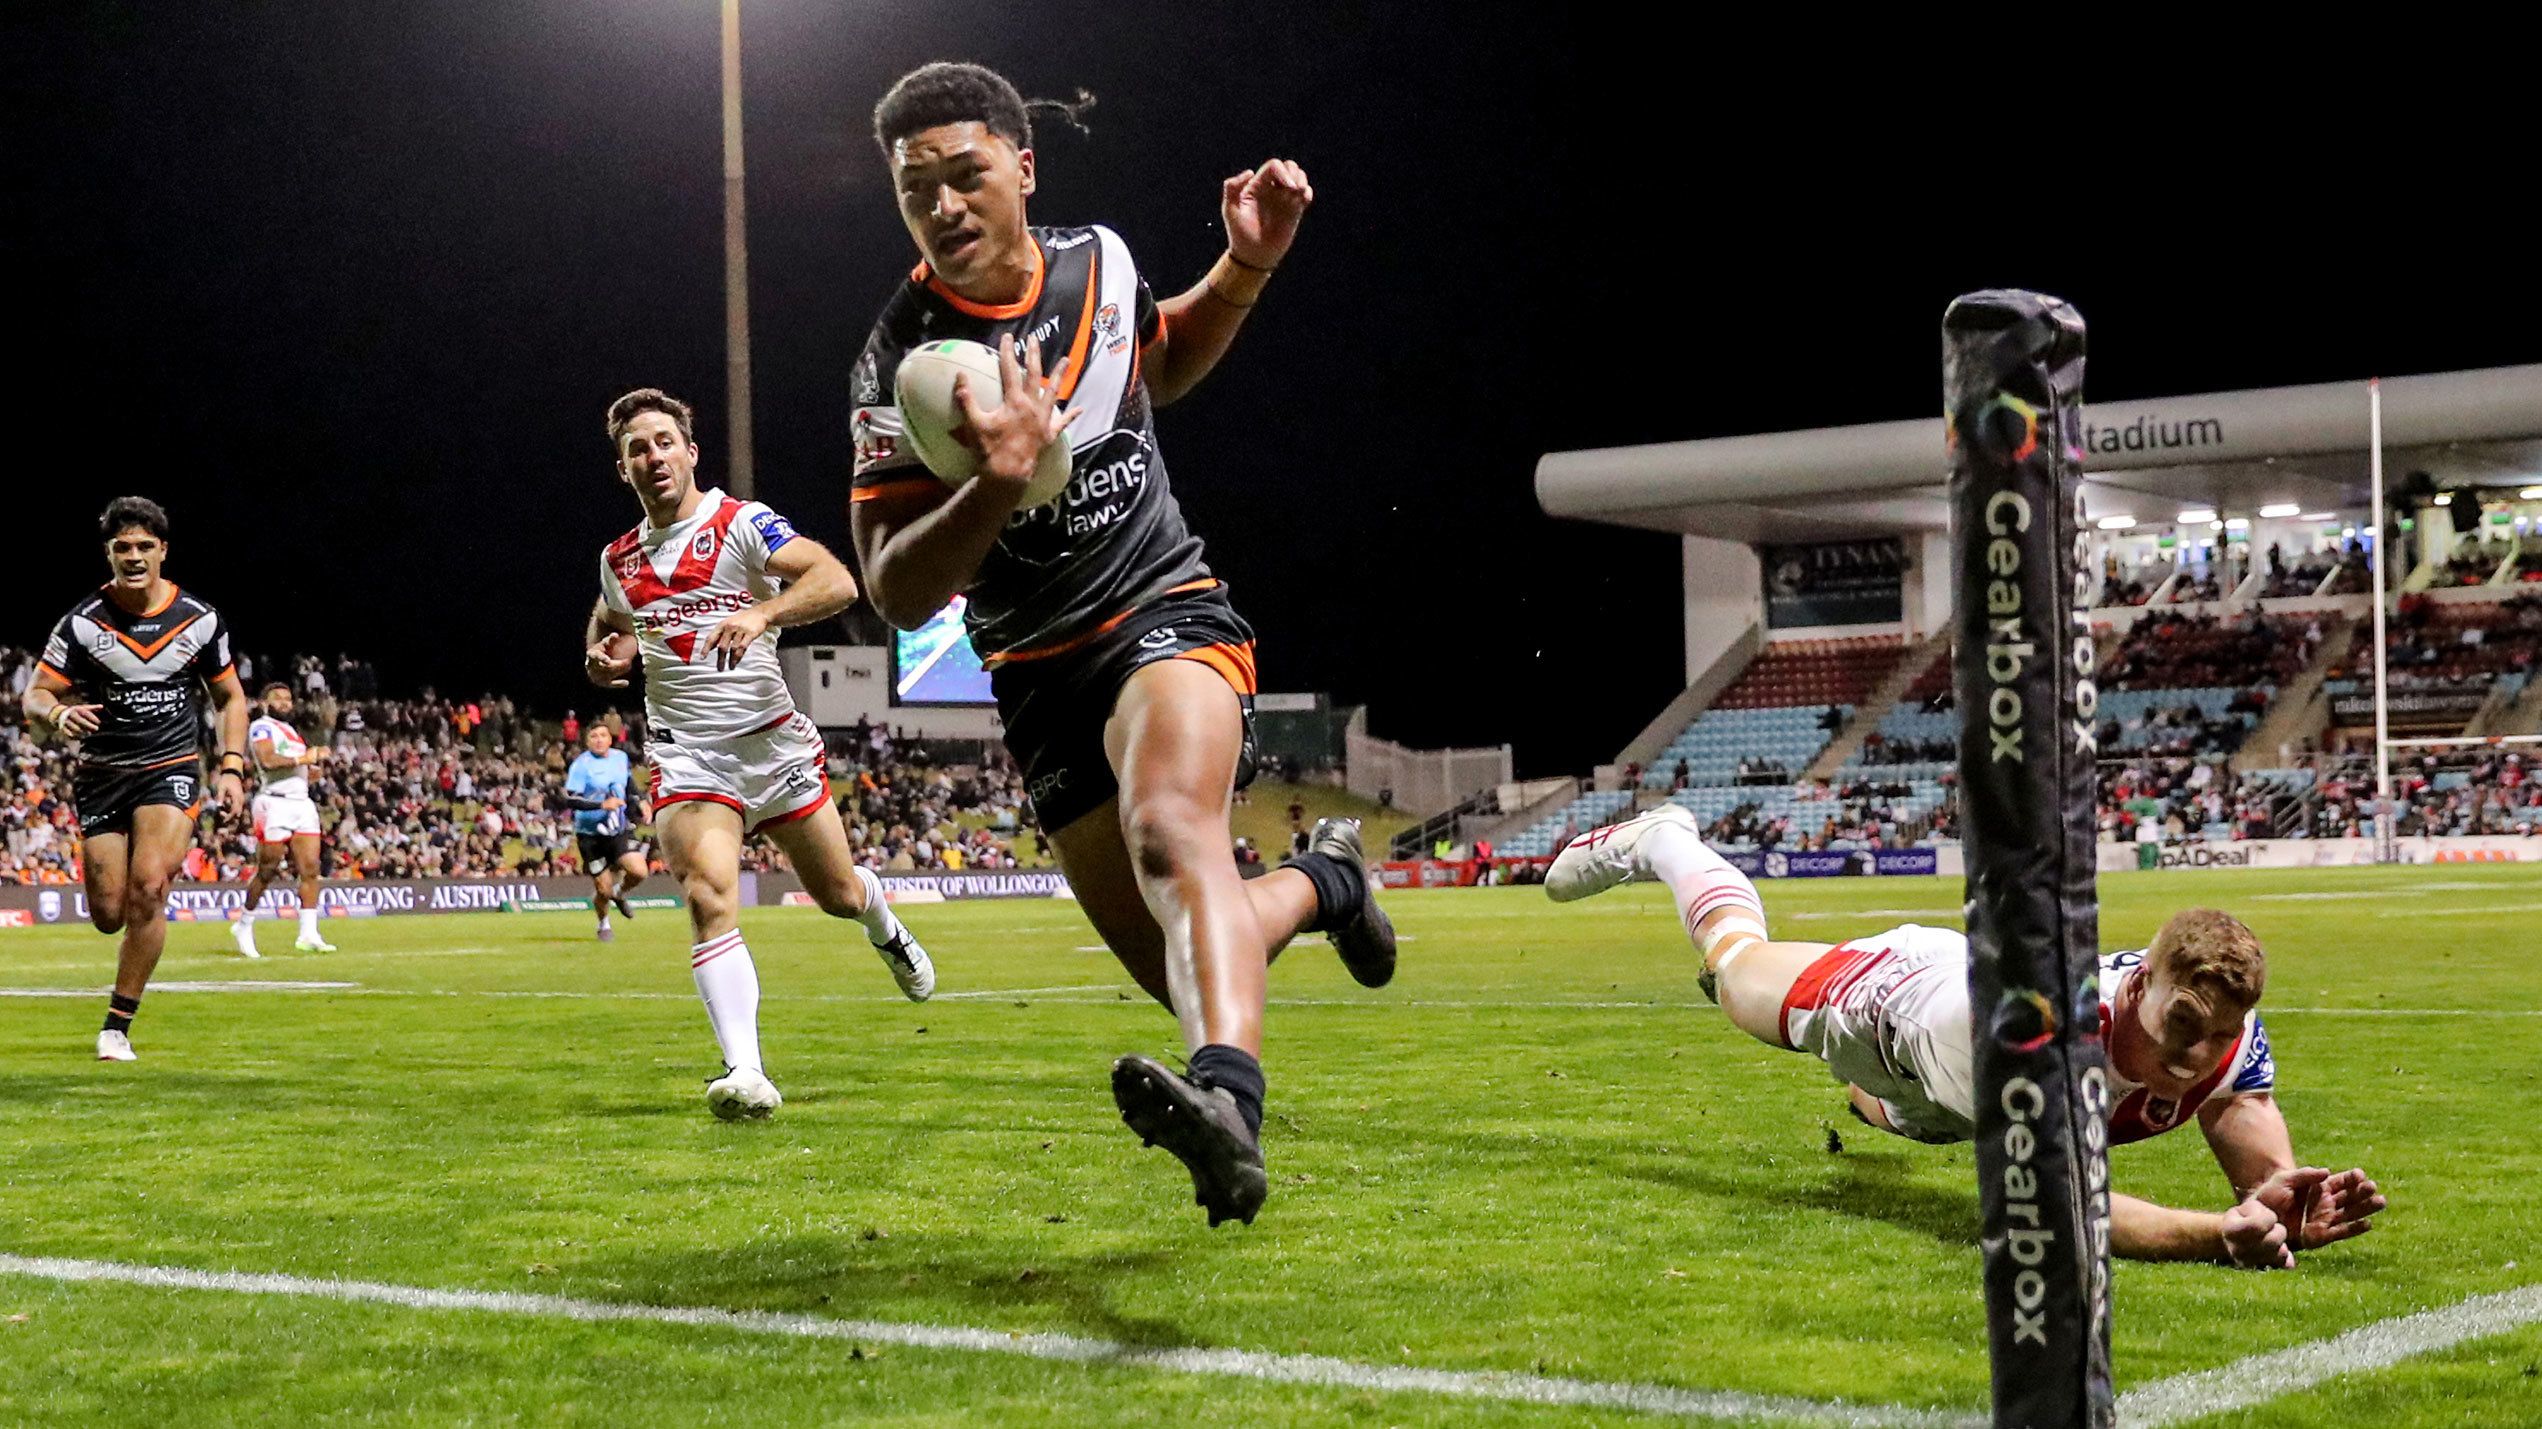 Junior Tupou of the Tigers runs in to score a try against the Dragons.